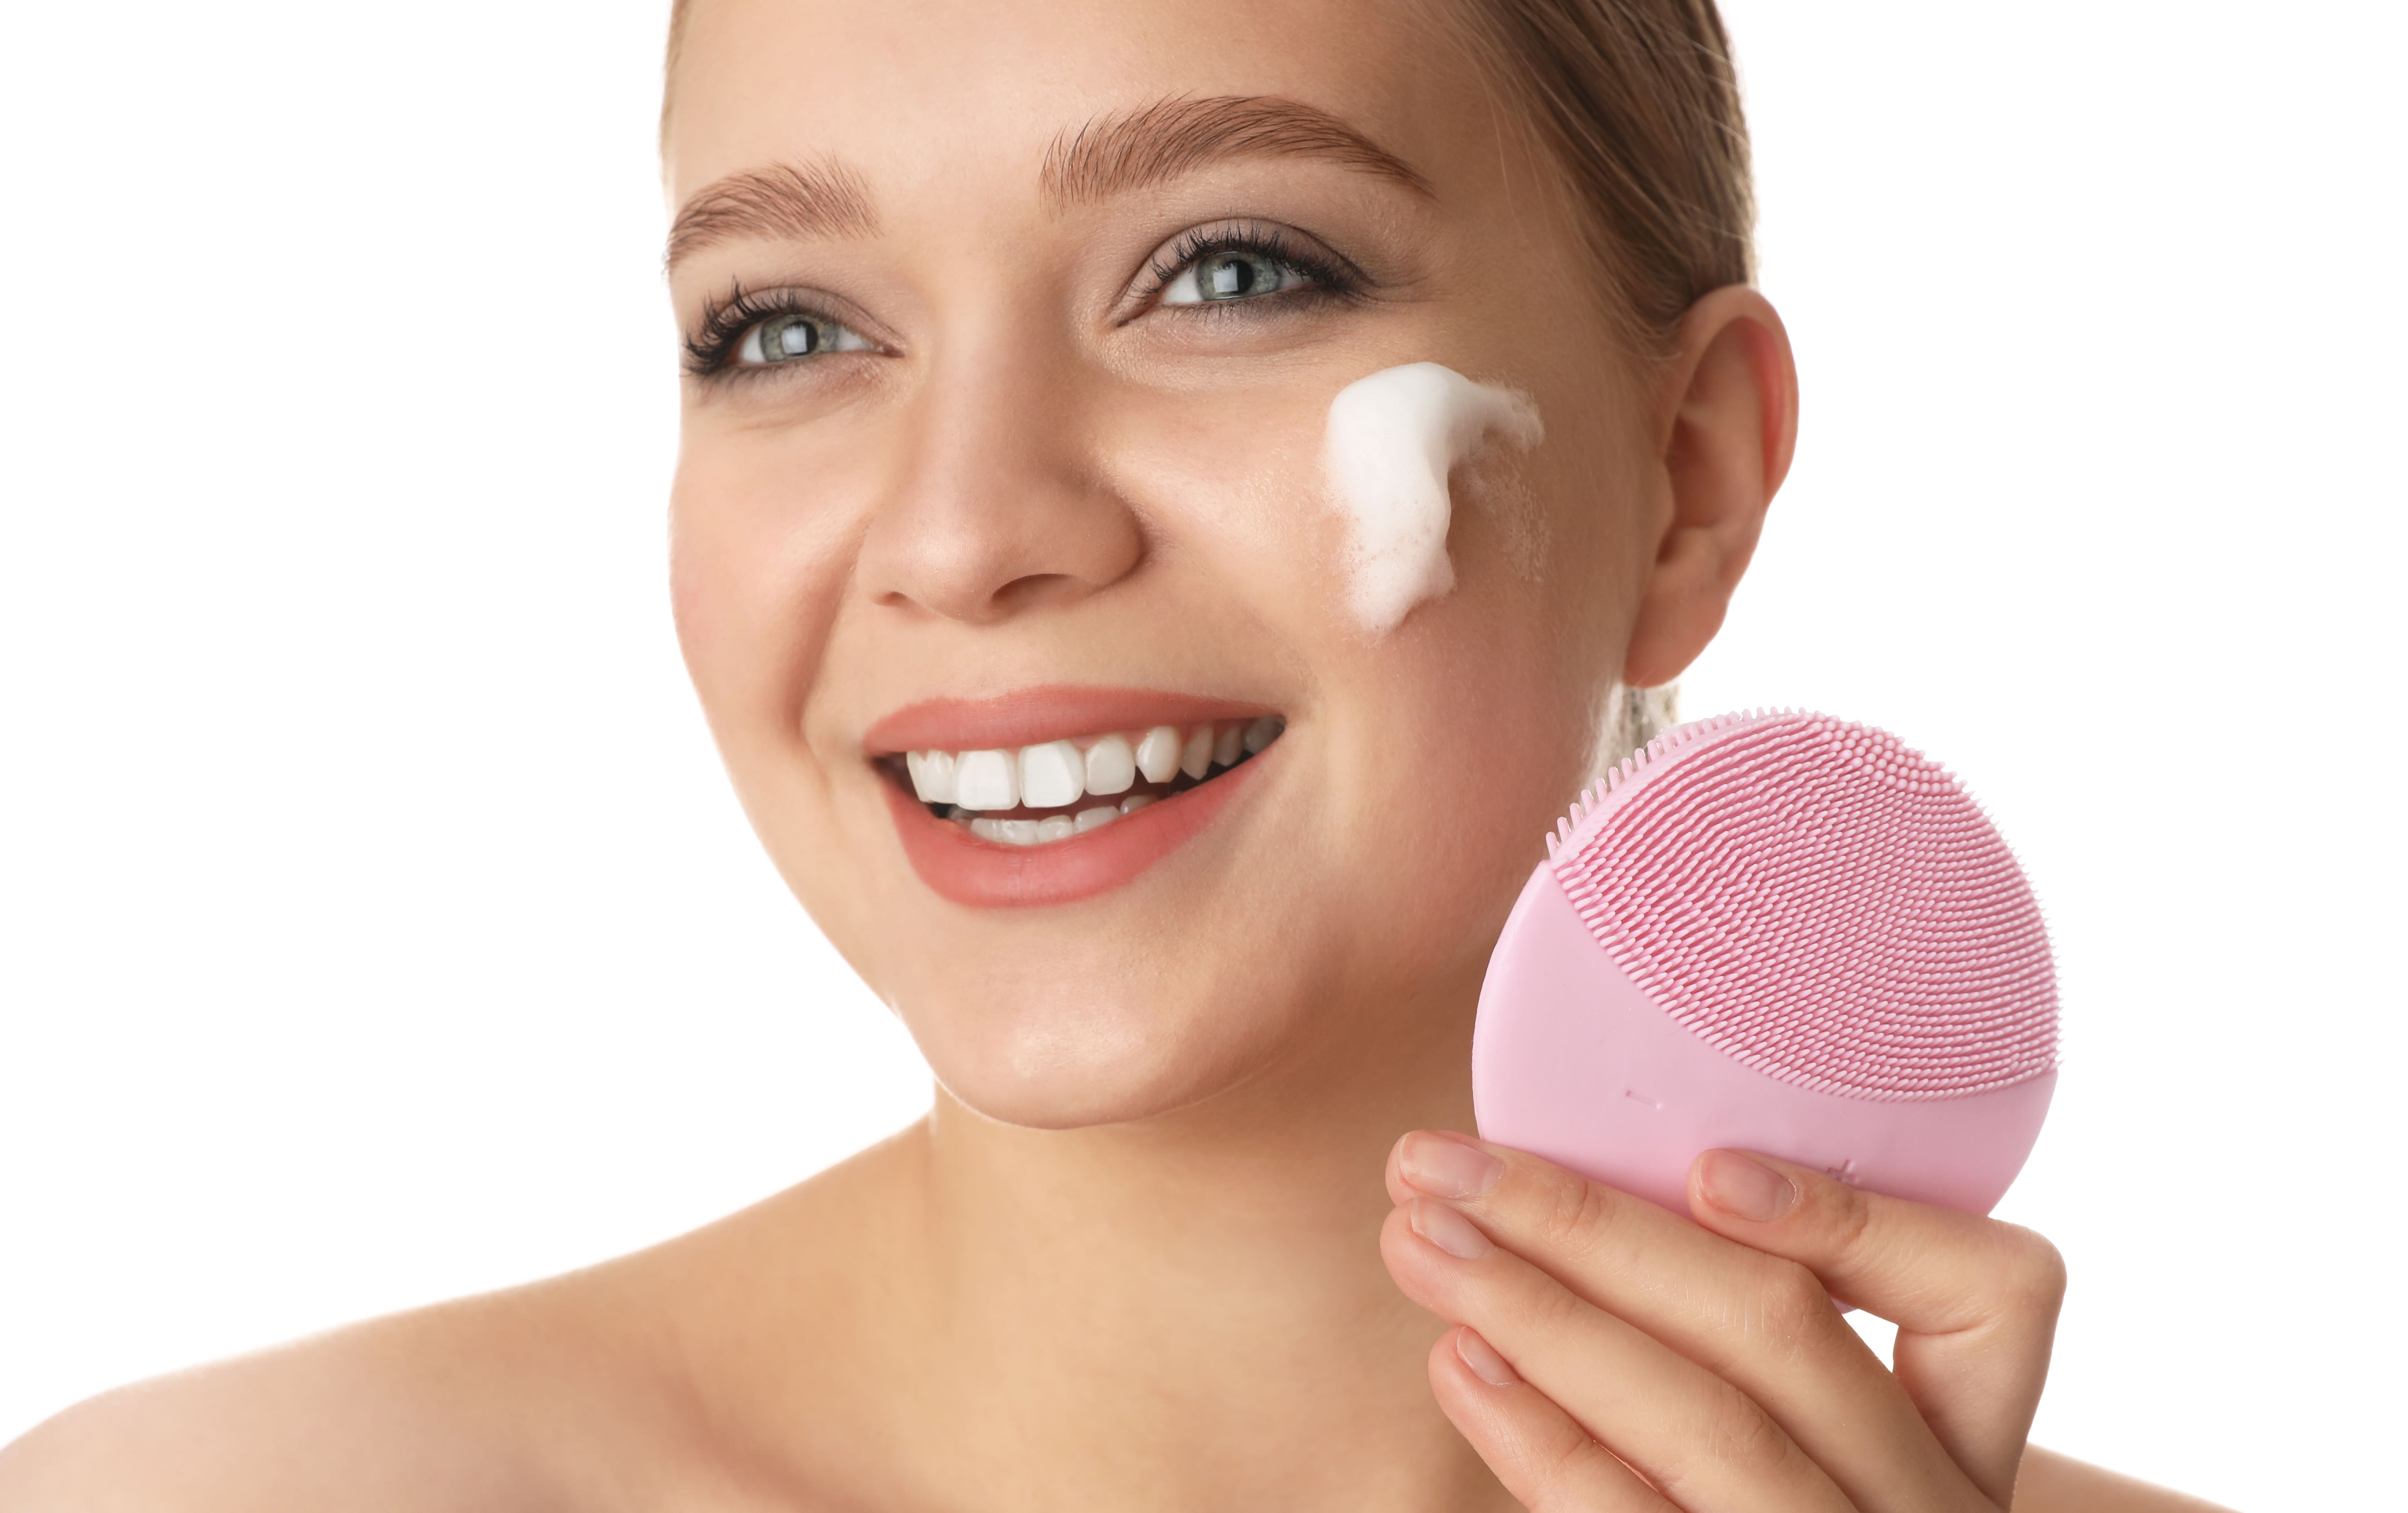 Remove The Makeup face cleansing pad